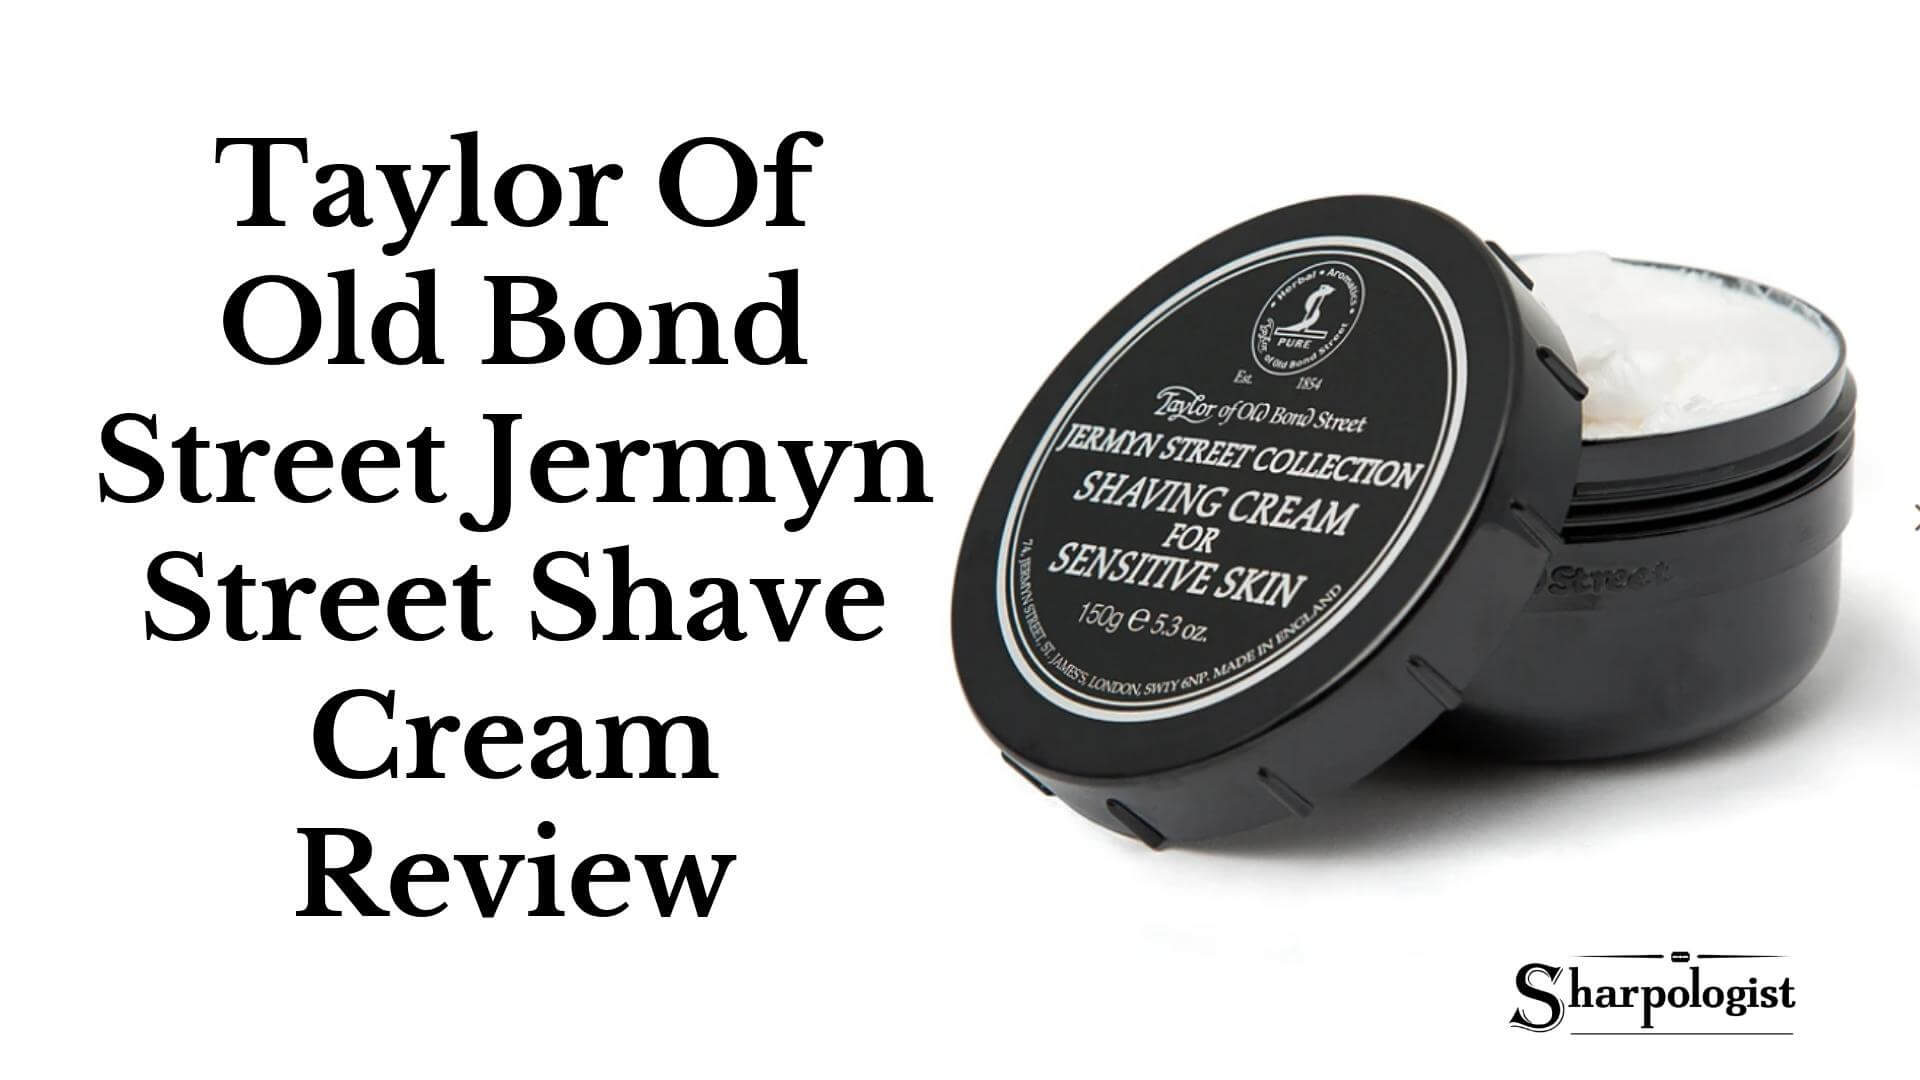 Taylor Bond Review Of Old Cream Street Street Jermyn Shave